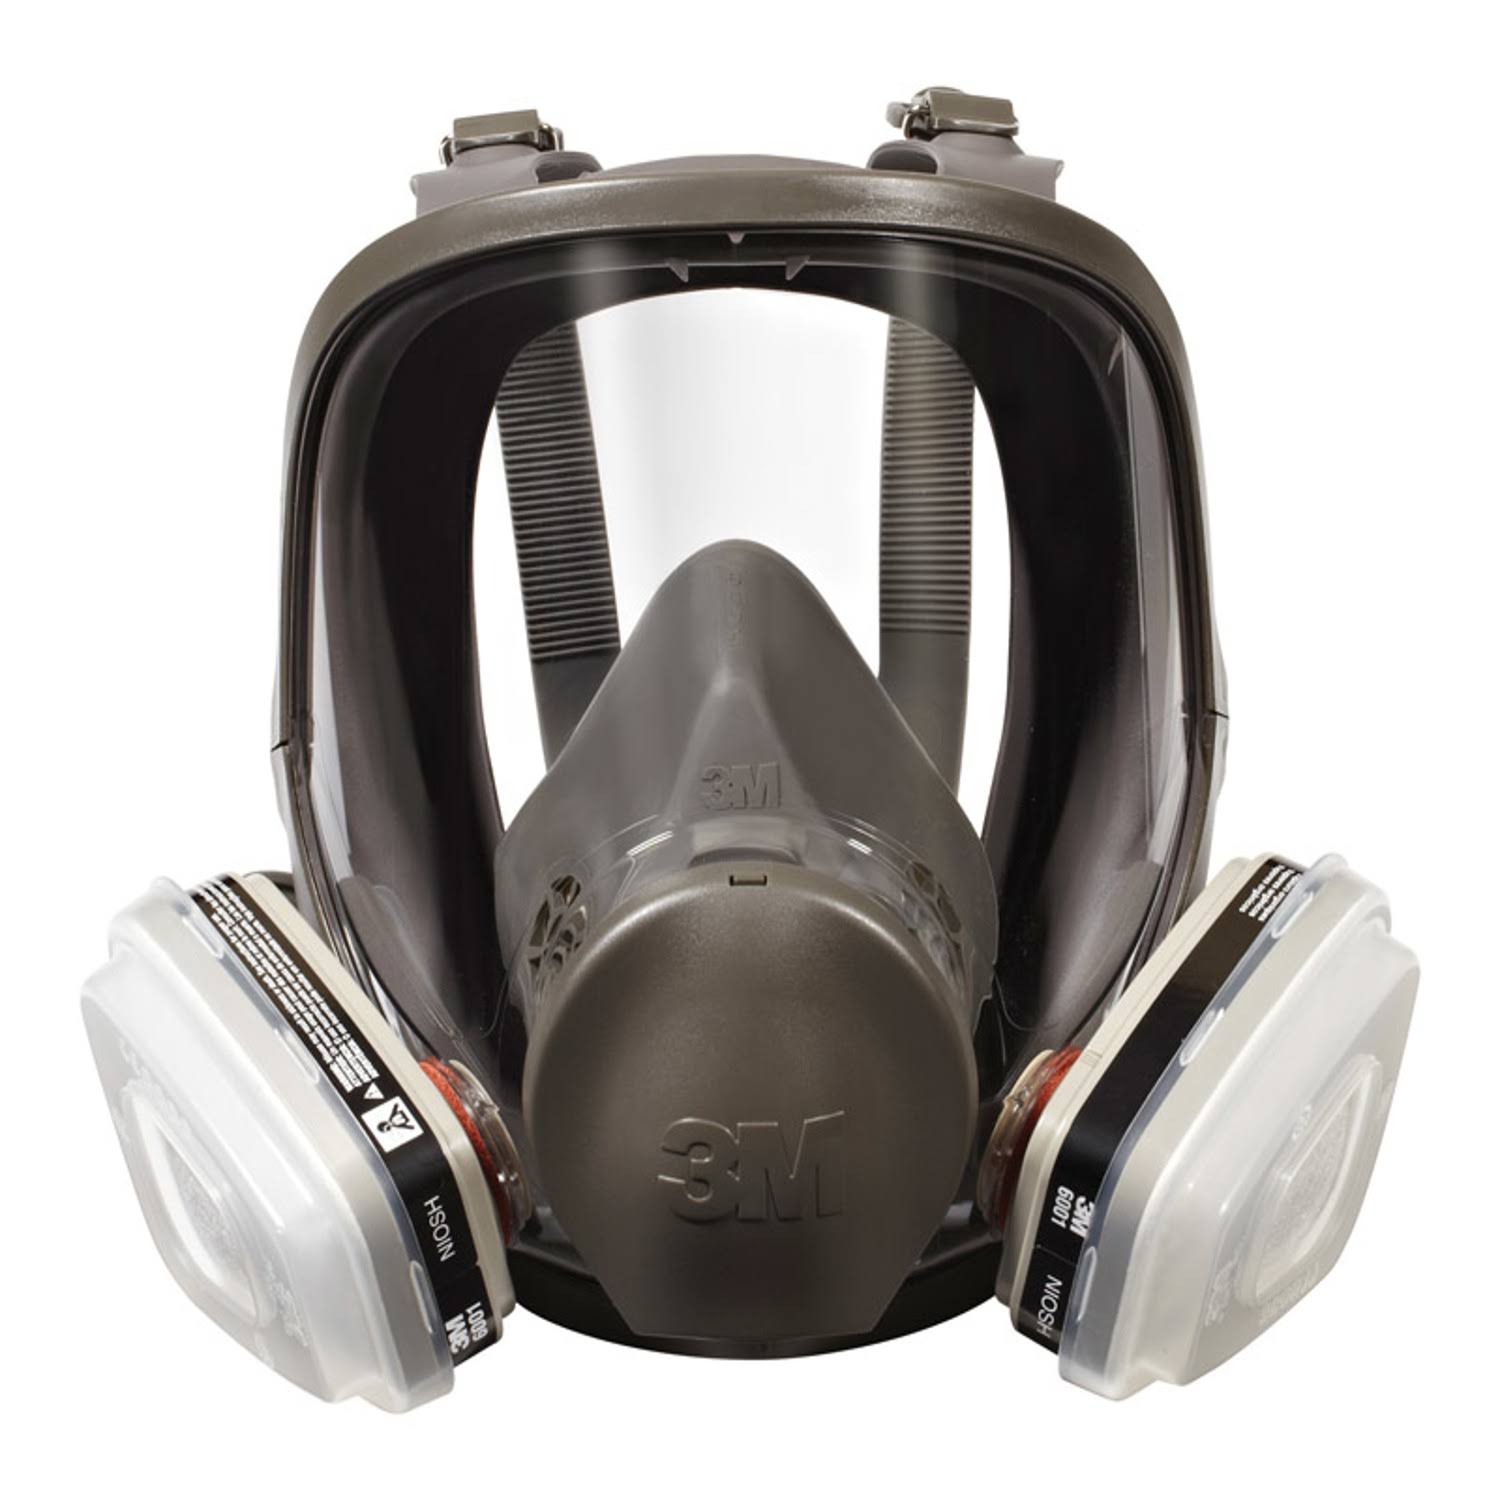 3M Full Face Paint Project Respirator - Large